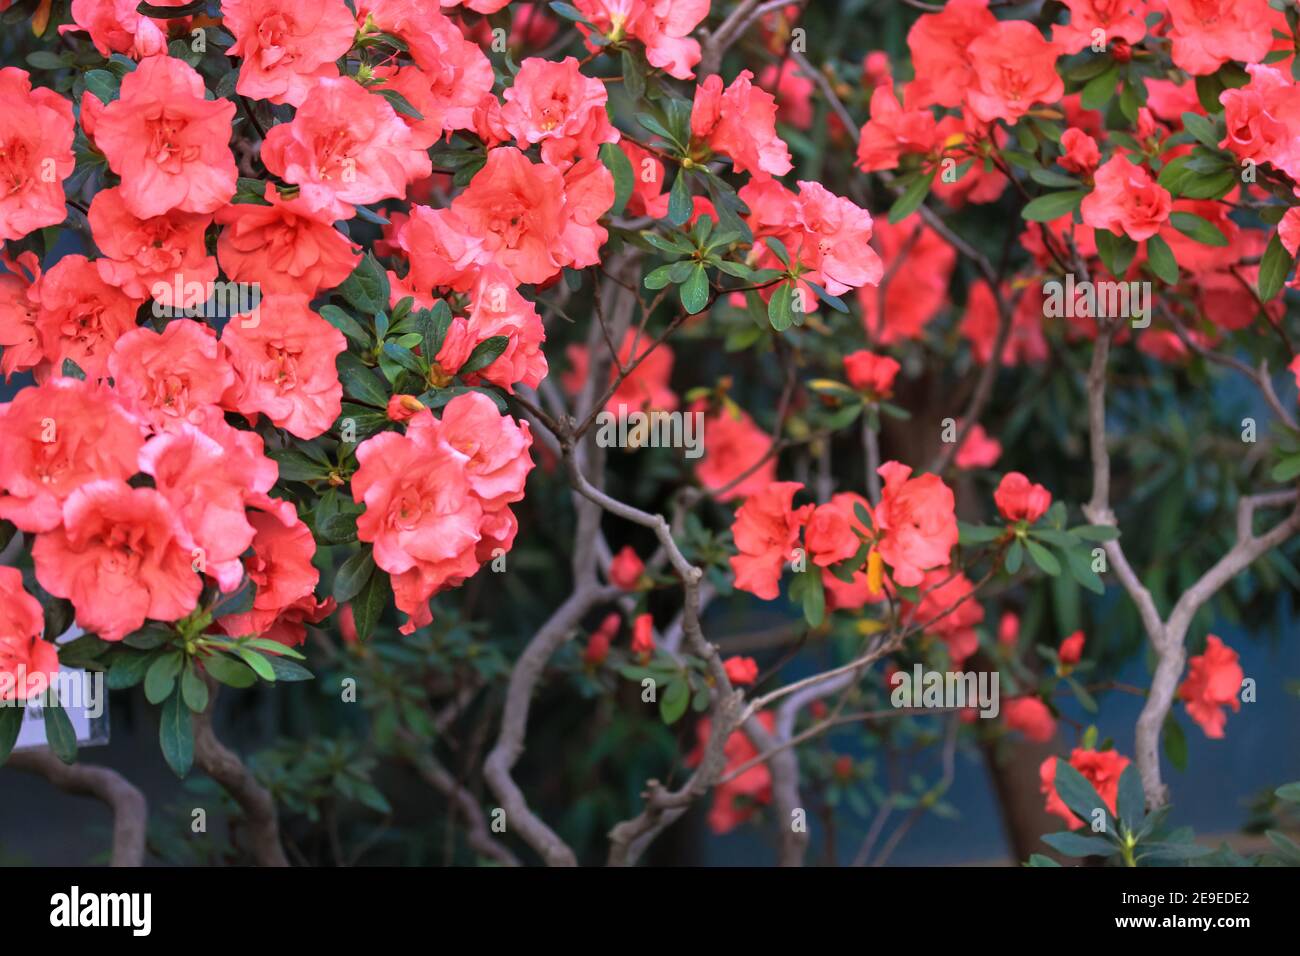 Red azaleas in bloom, rhododendron tree with flowers against green foliage background. Garden plant care. Place for text. Stock Photo